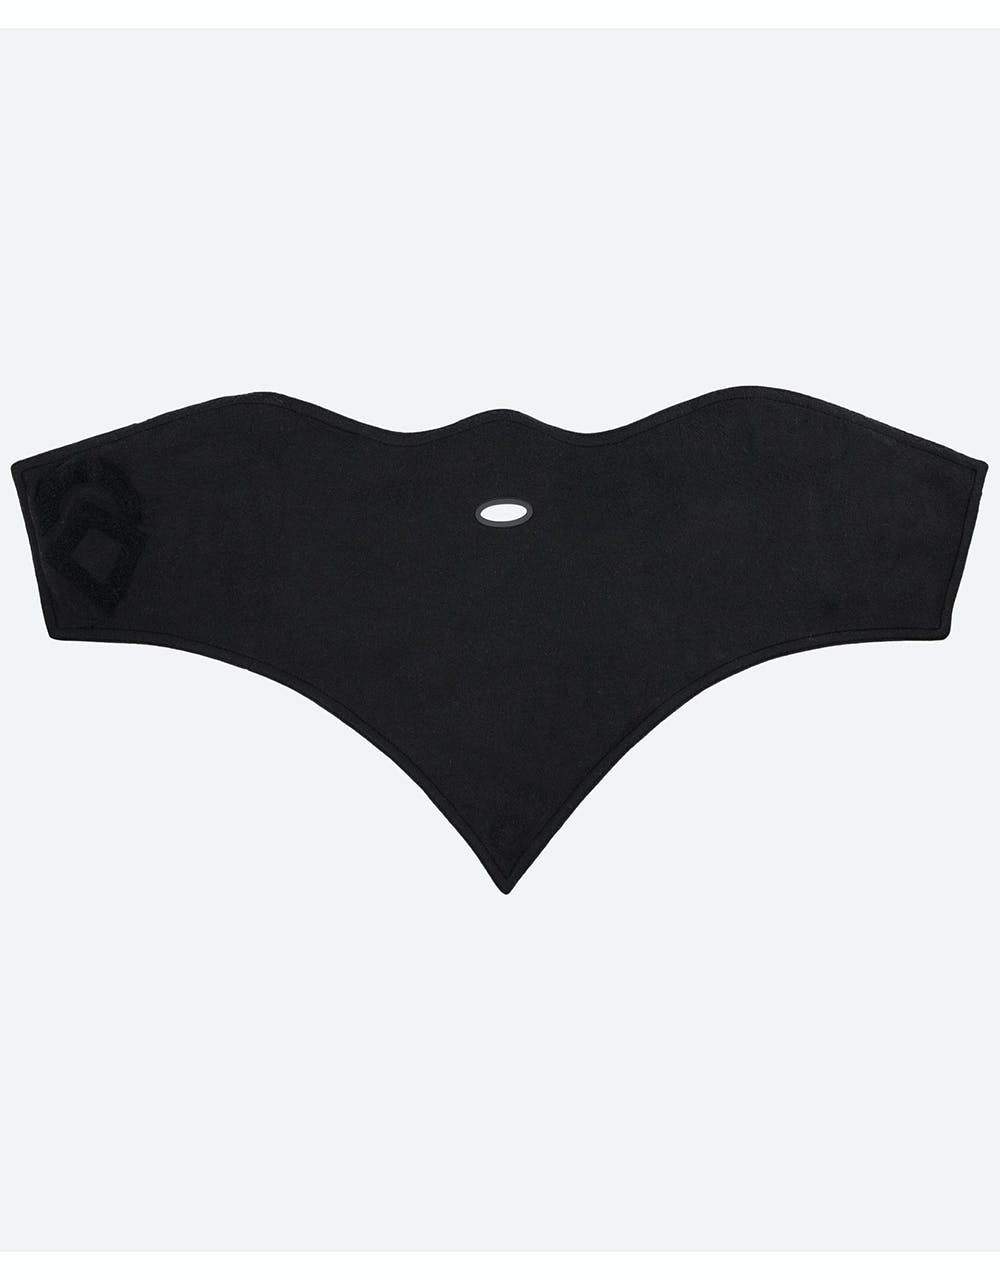 Airhole Standard 2 Layer Facemask - Black